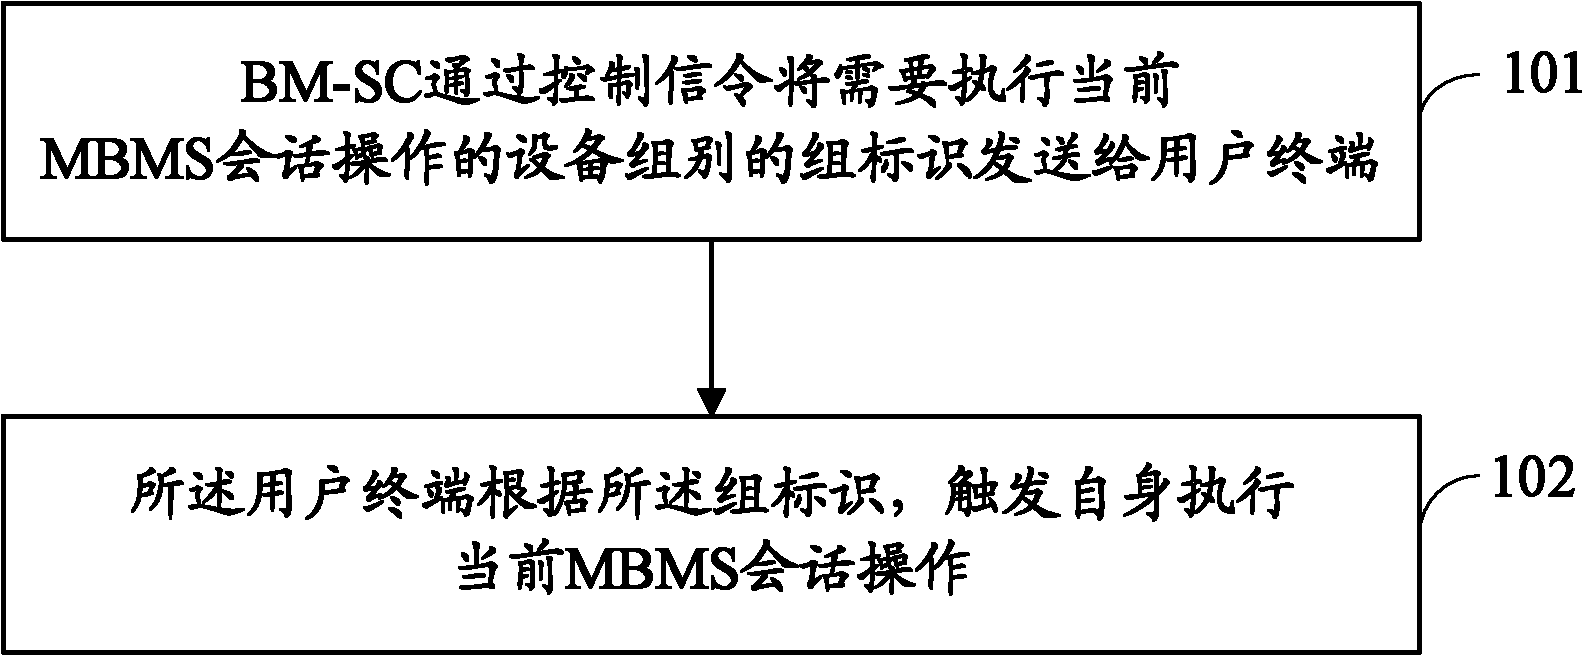 MBMS (Multimedia Broadcasting/Multicast Service) triggering method and system